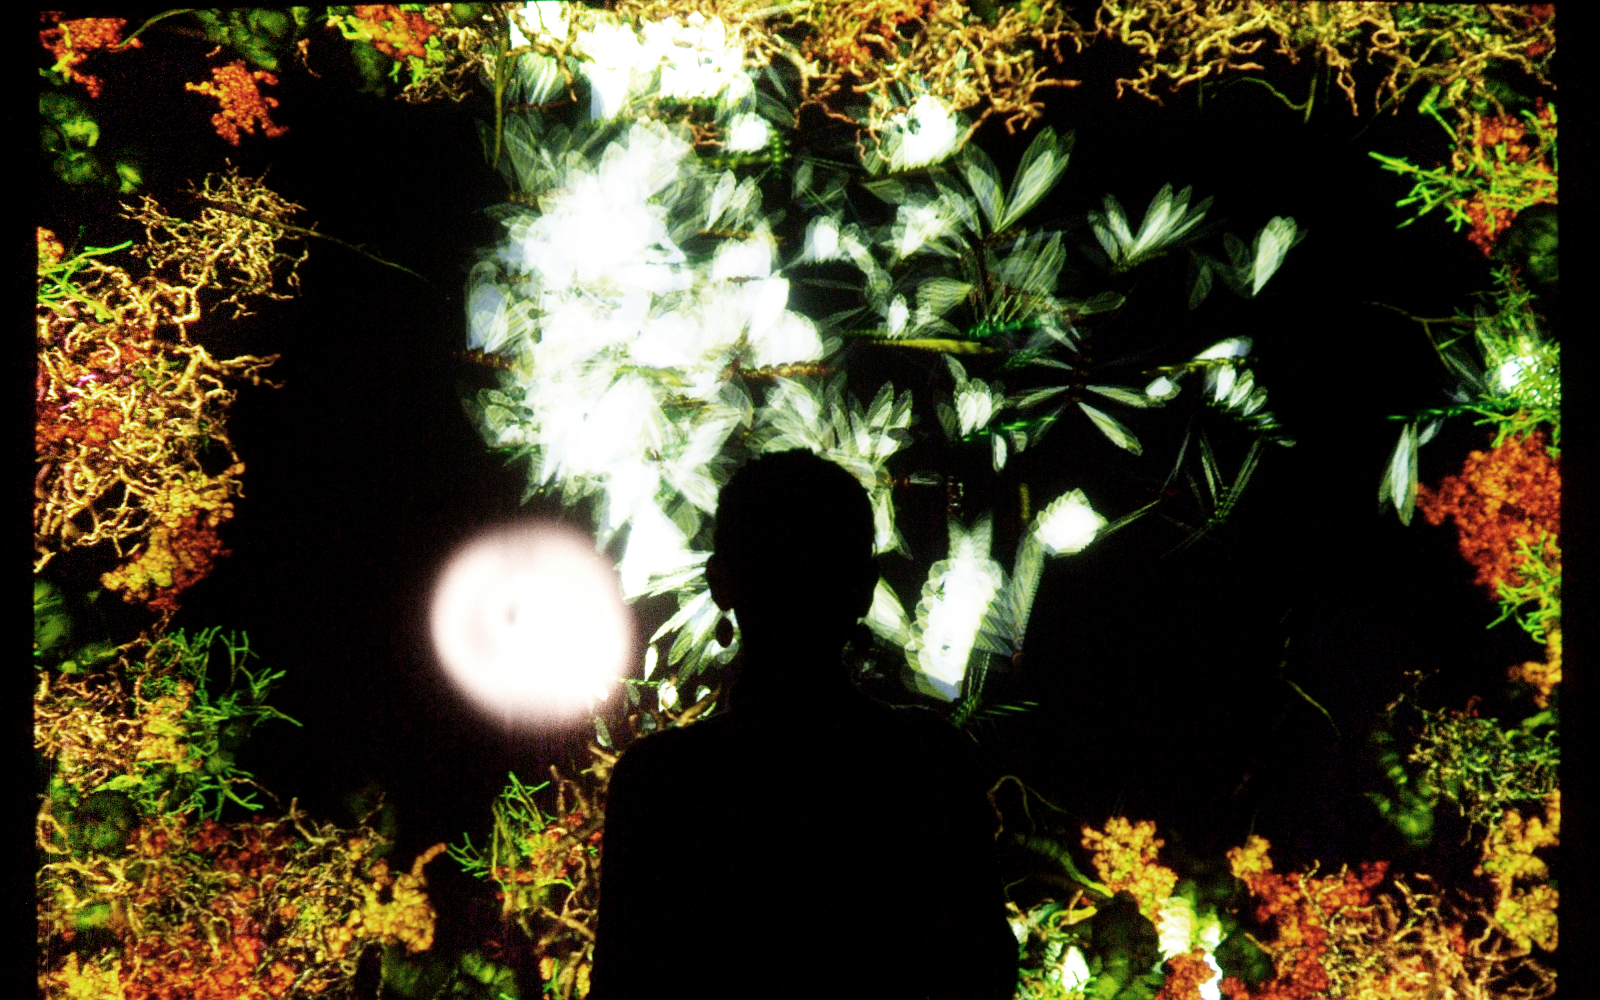 The silhouette of a person in front of a screen of glowing plants